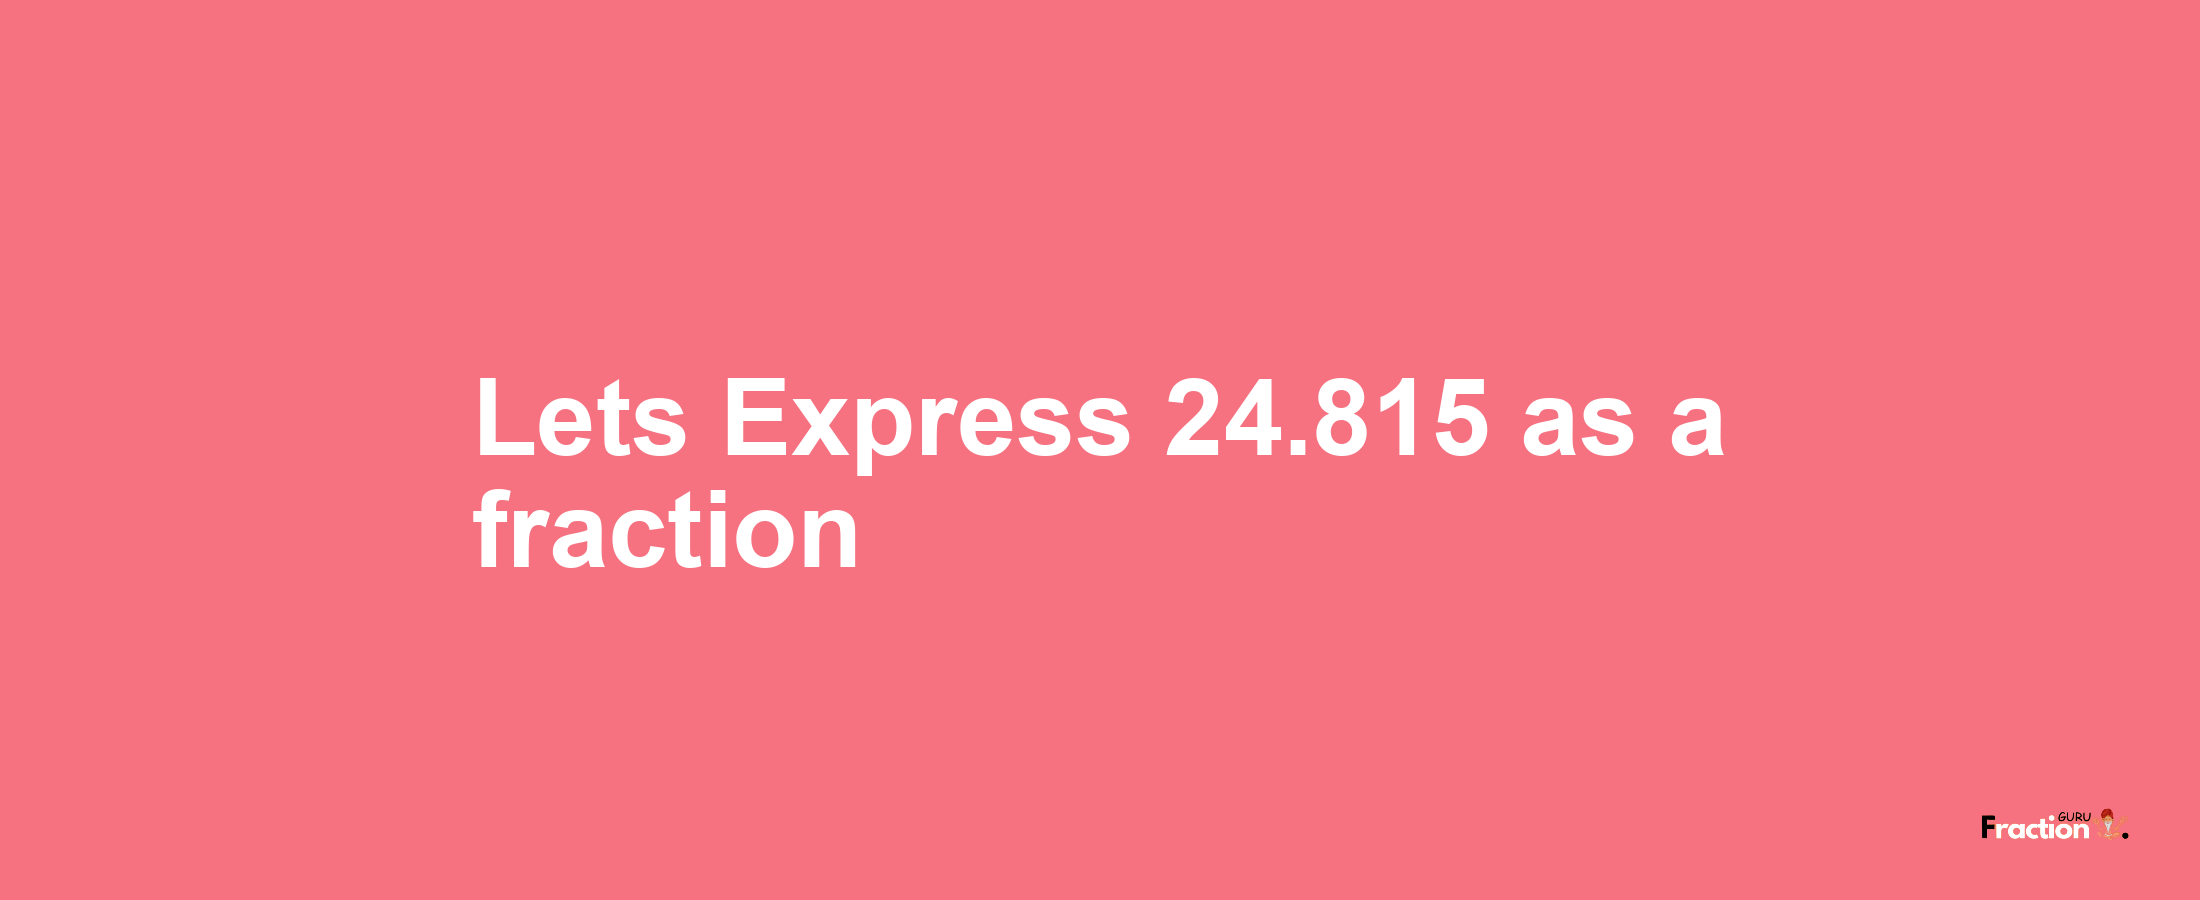 Lets Express 24.815 as afraction